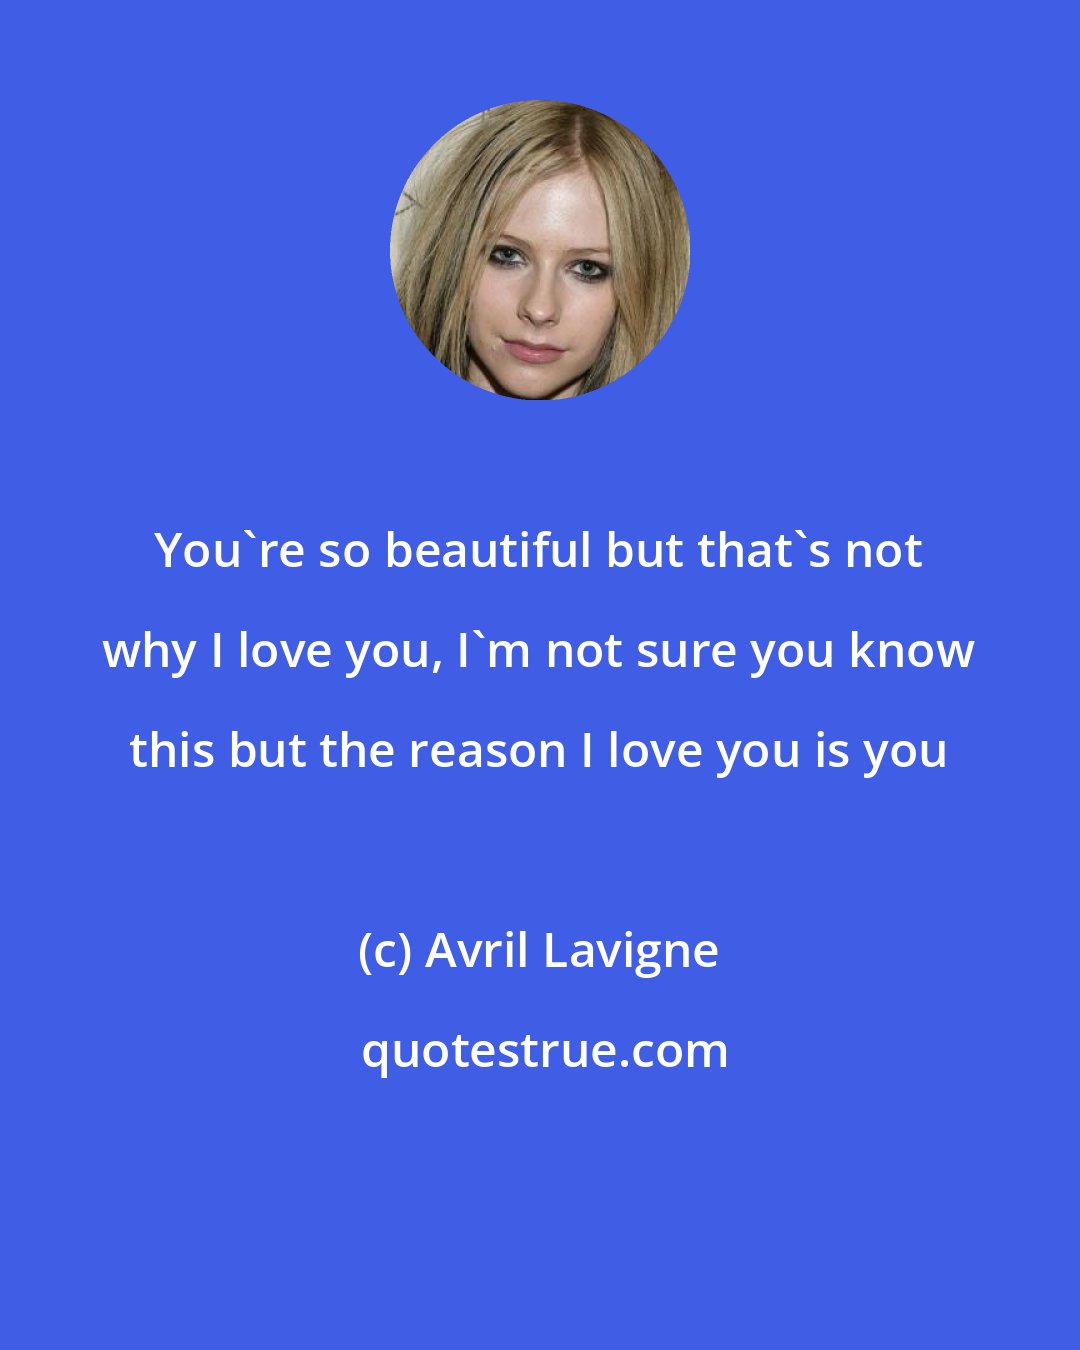 Avril Lavigne: You're so beautiful but that's not why I love you, I'm not sure you know this but the reason I love you is you